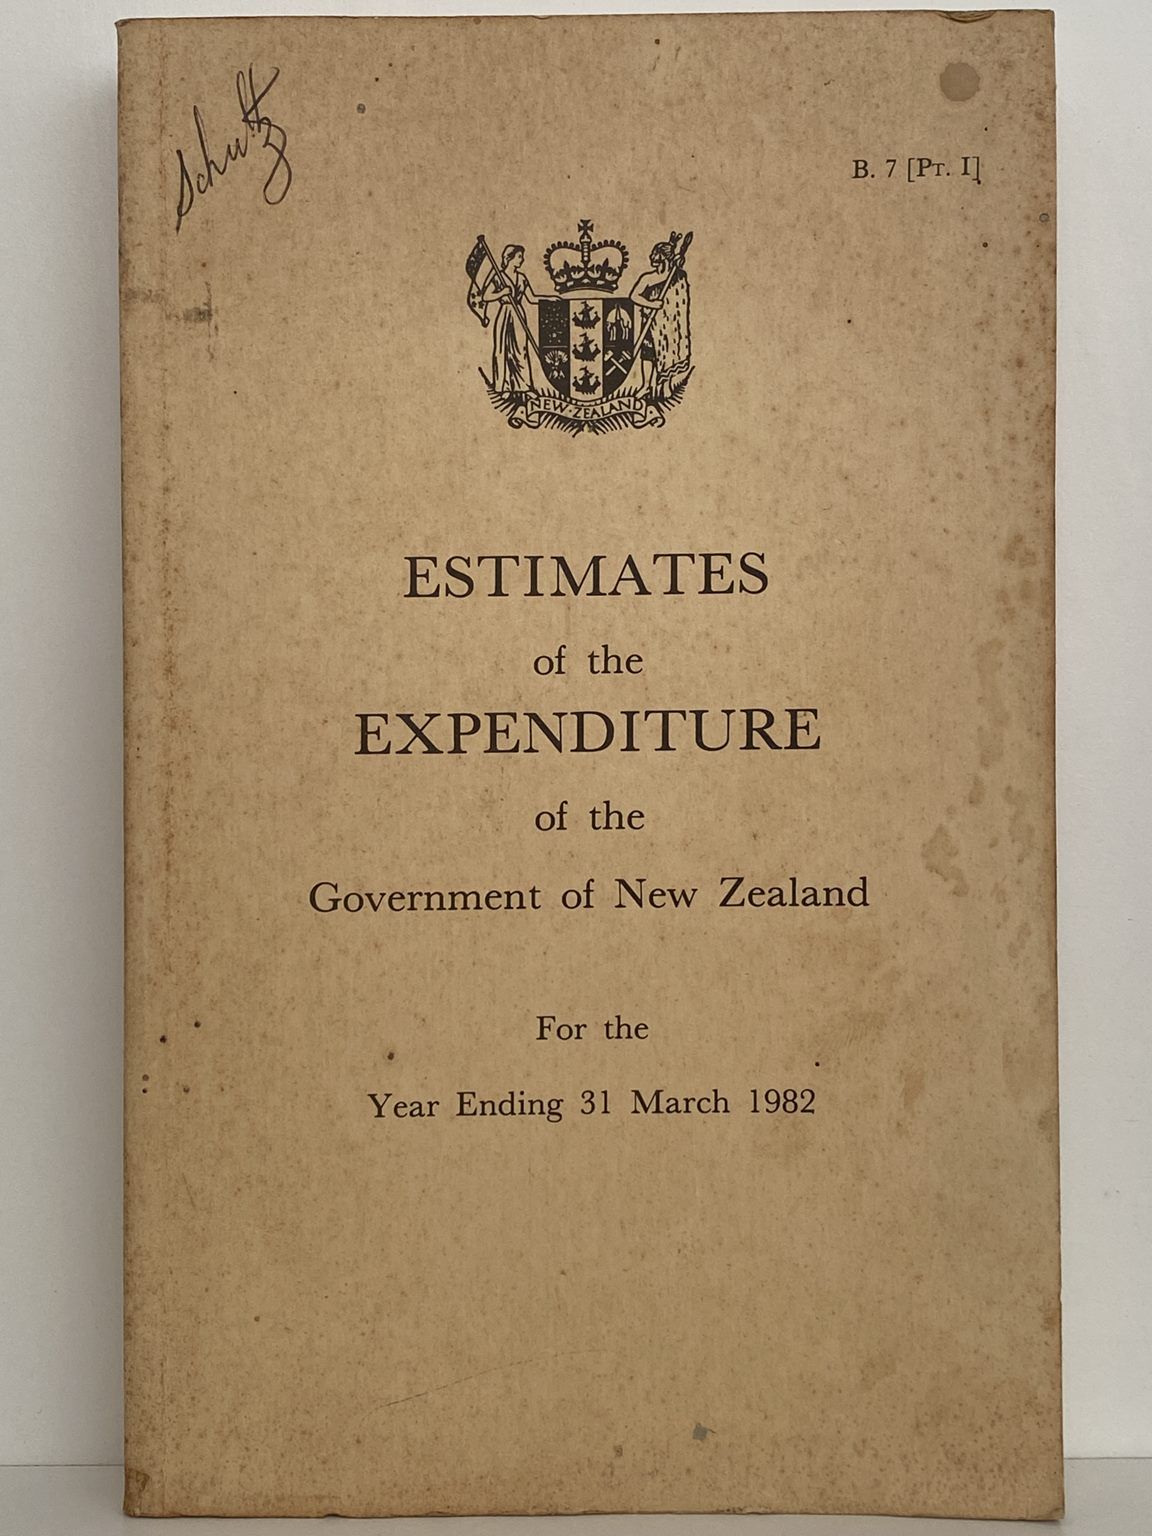 ESTIMATES of the EXPENDATURE of the GOVERMENT of NEW ZEALAND March 1982